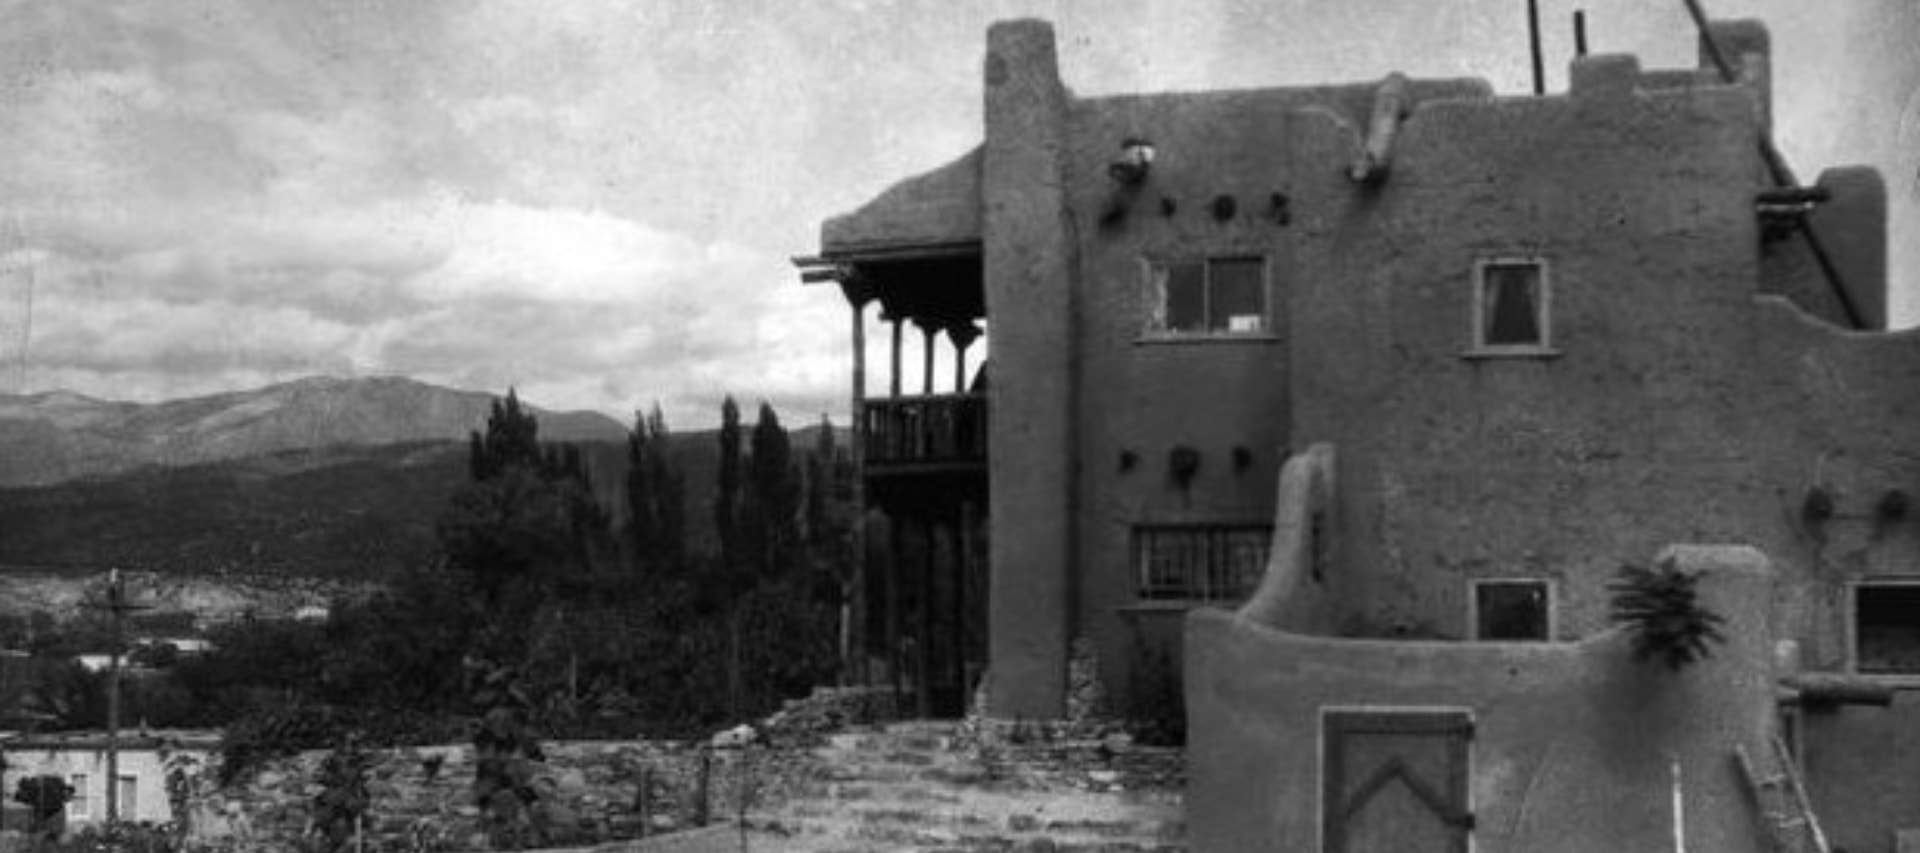 Historical version of the exterior view of the Inn of the Turquoise Bear property